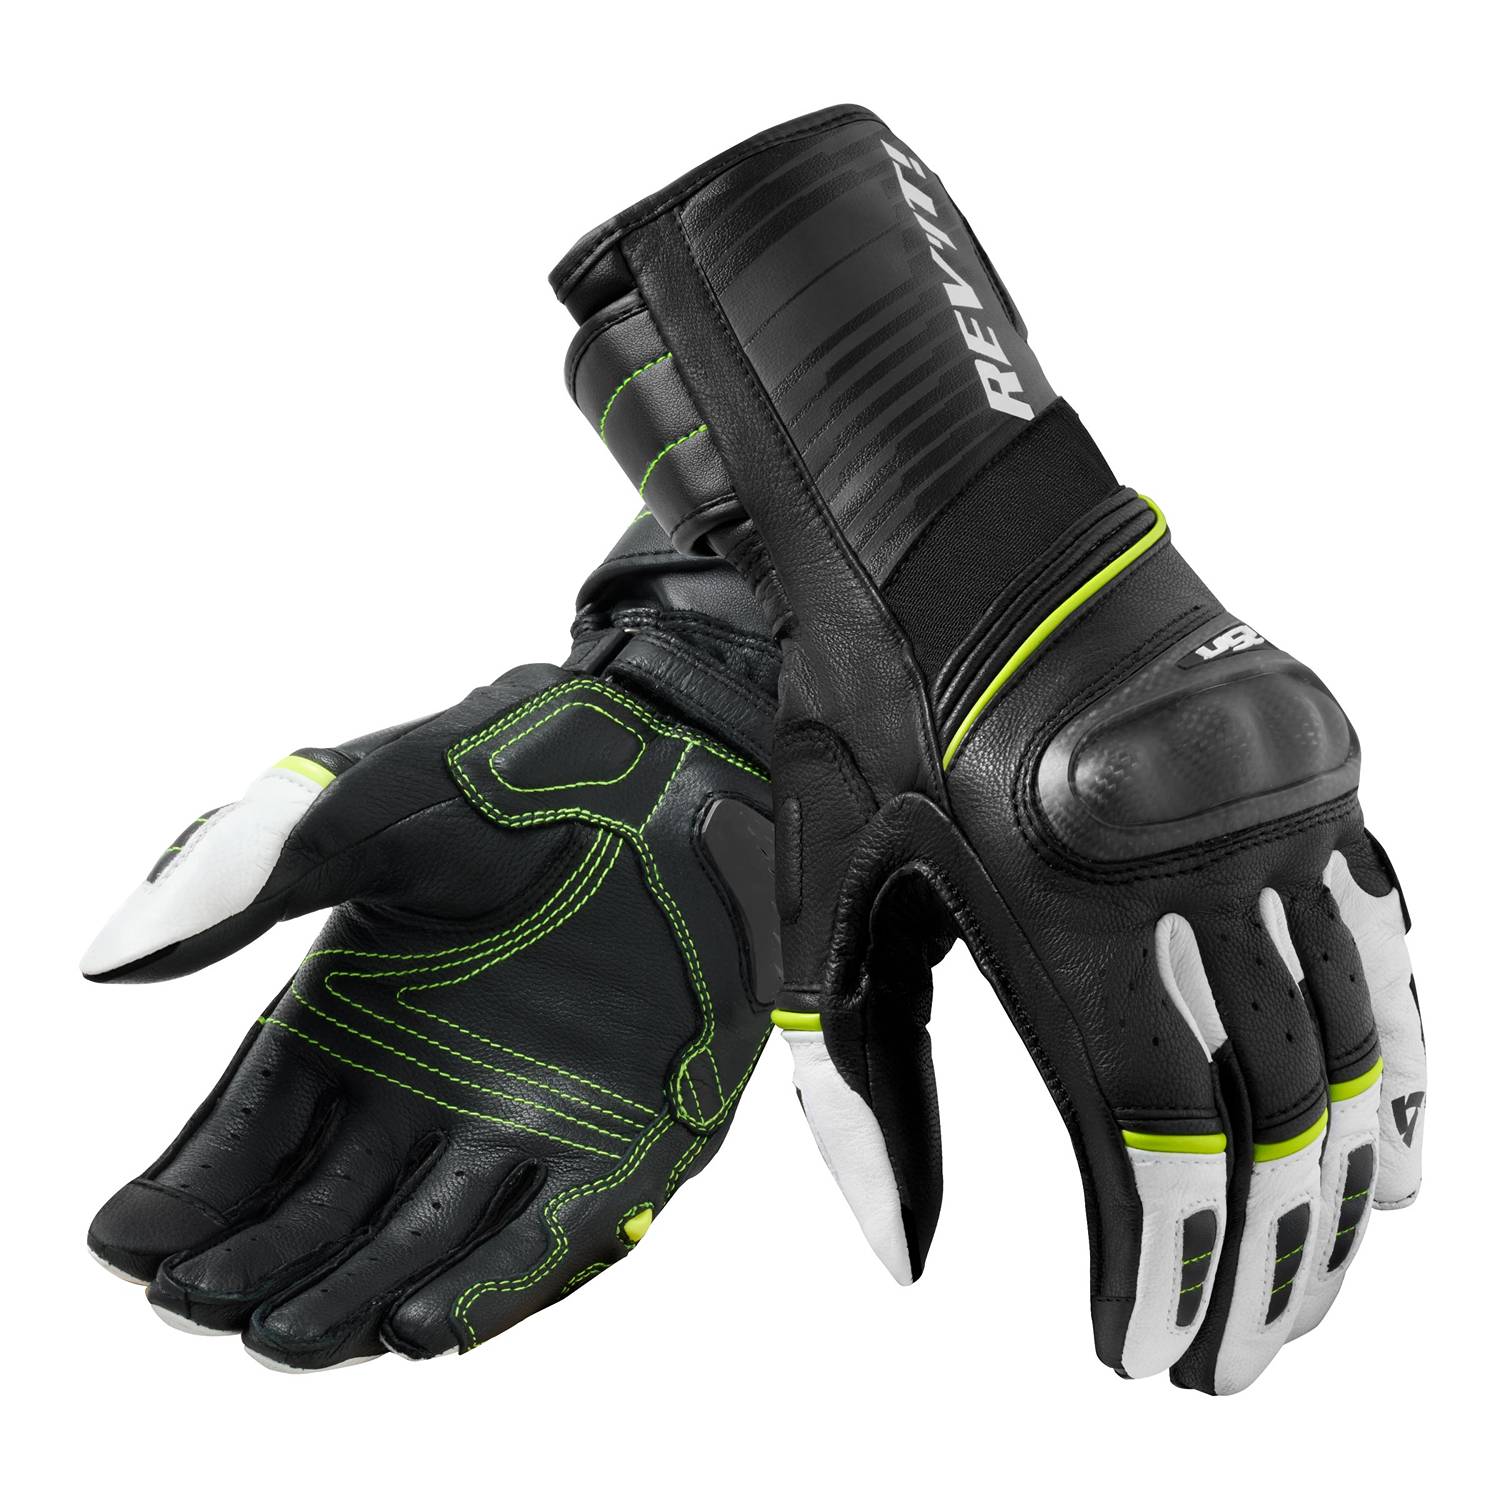 Image of REV'IT! RSR 4 Black Gloves Neon Yellow Size M ID 8700001306805